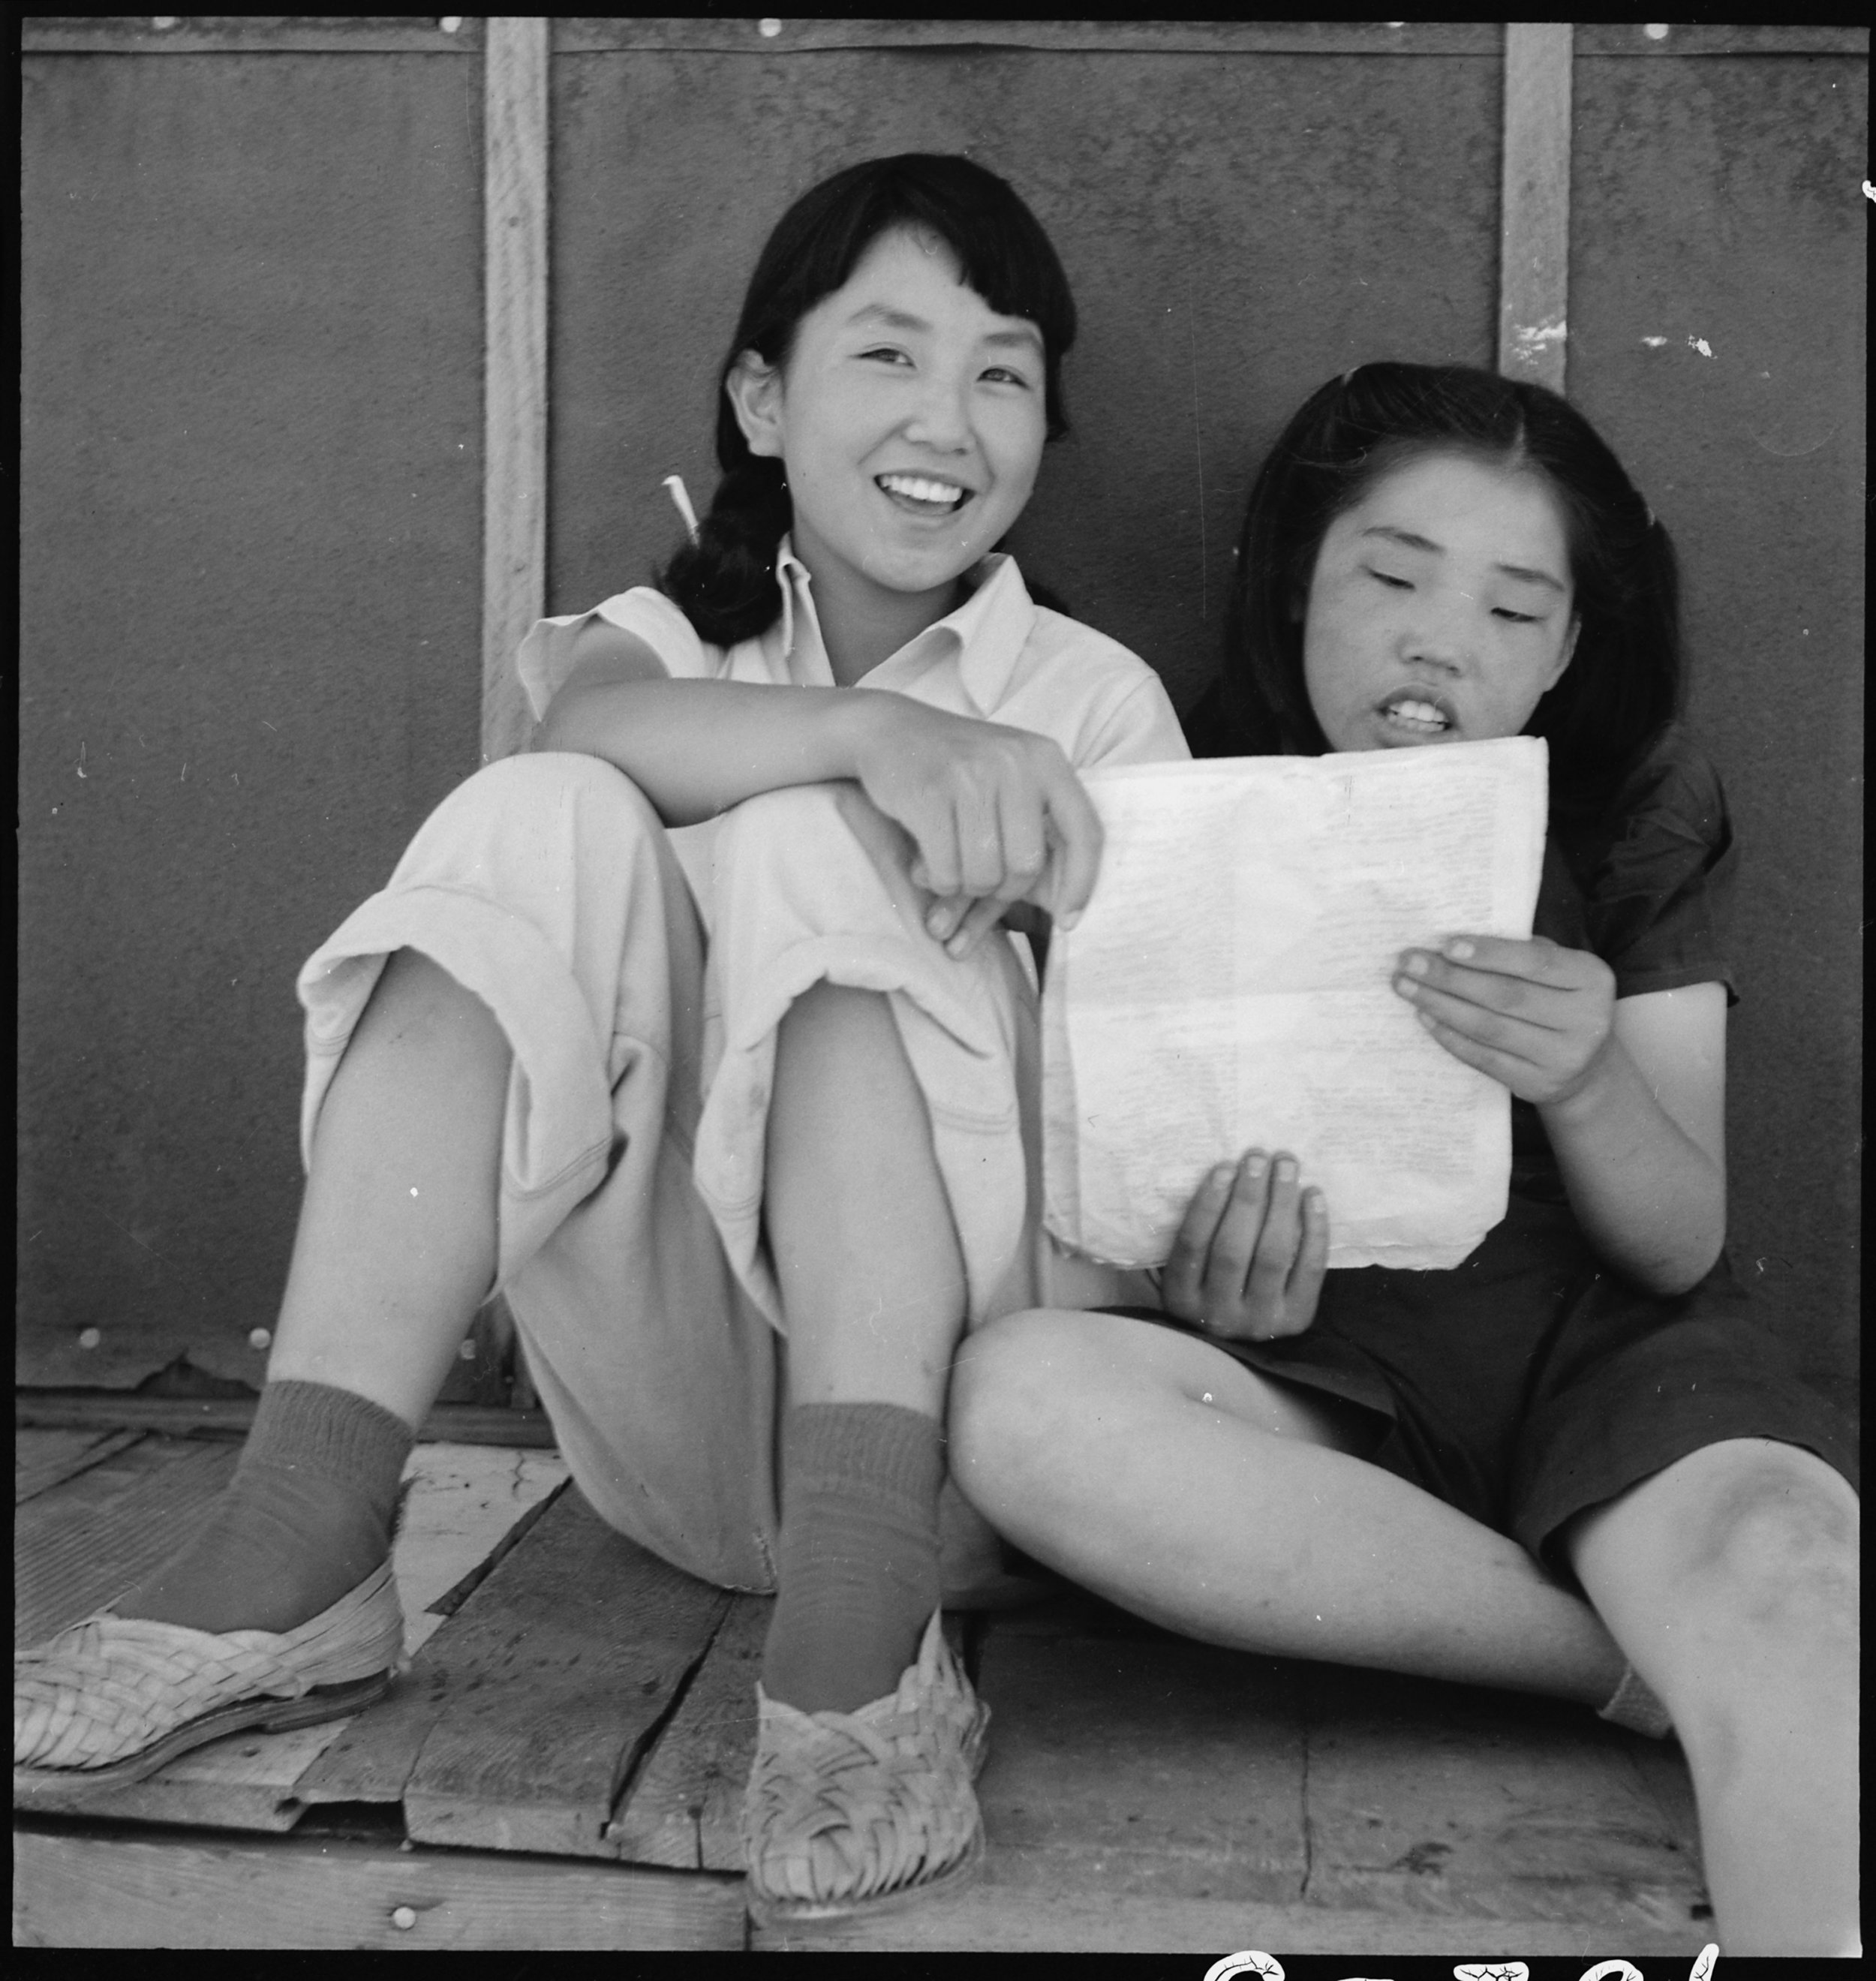  Manzanar Relocation Center, Manzanar, California. Evacuee girls practicing the songs they learned in school prior to evacuation to this War Relocaction Authority center for evacuees of Japanese ancestry. 